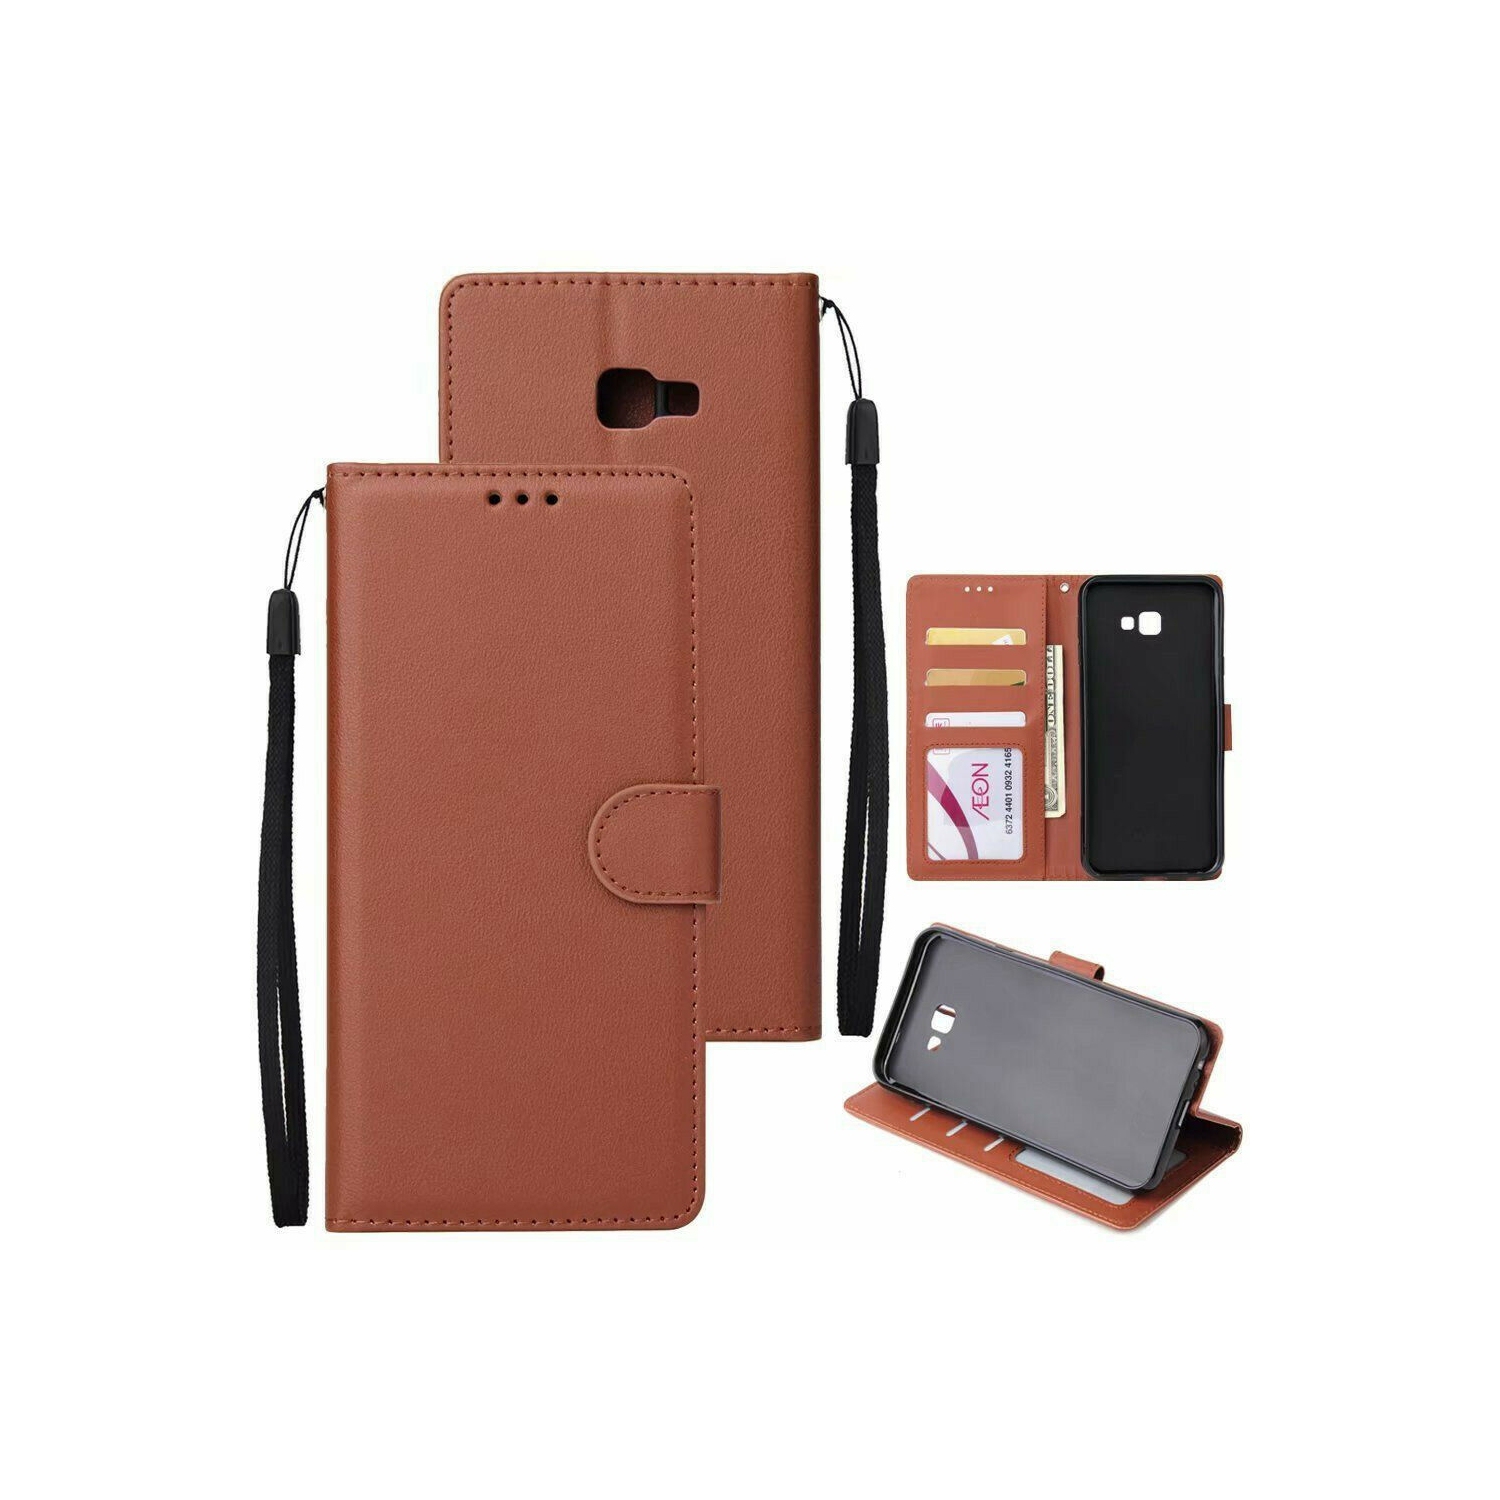 【CSmart】 Magnetic Card Slot Leather Folio Wallet Flip Case Cover for Samsung Galaxy J3 Prime / Galaxy J3 2017, Brown